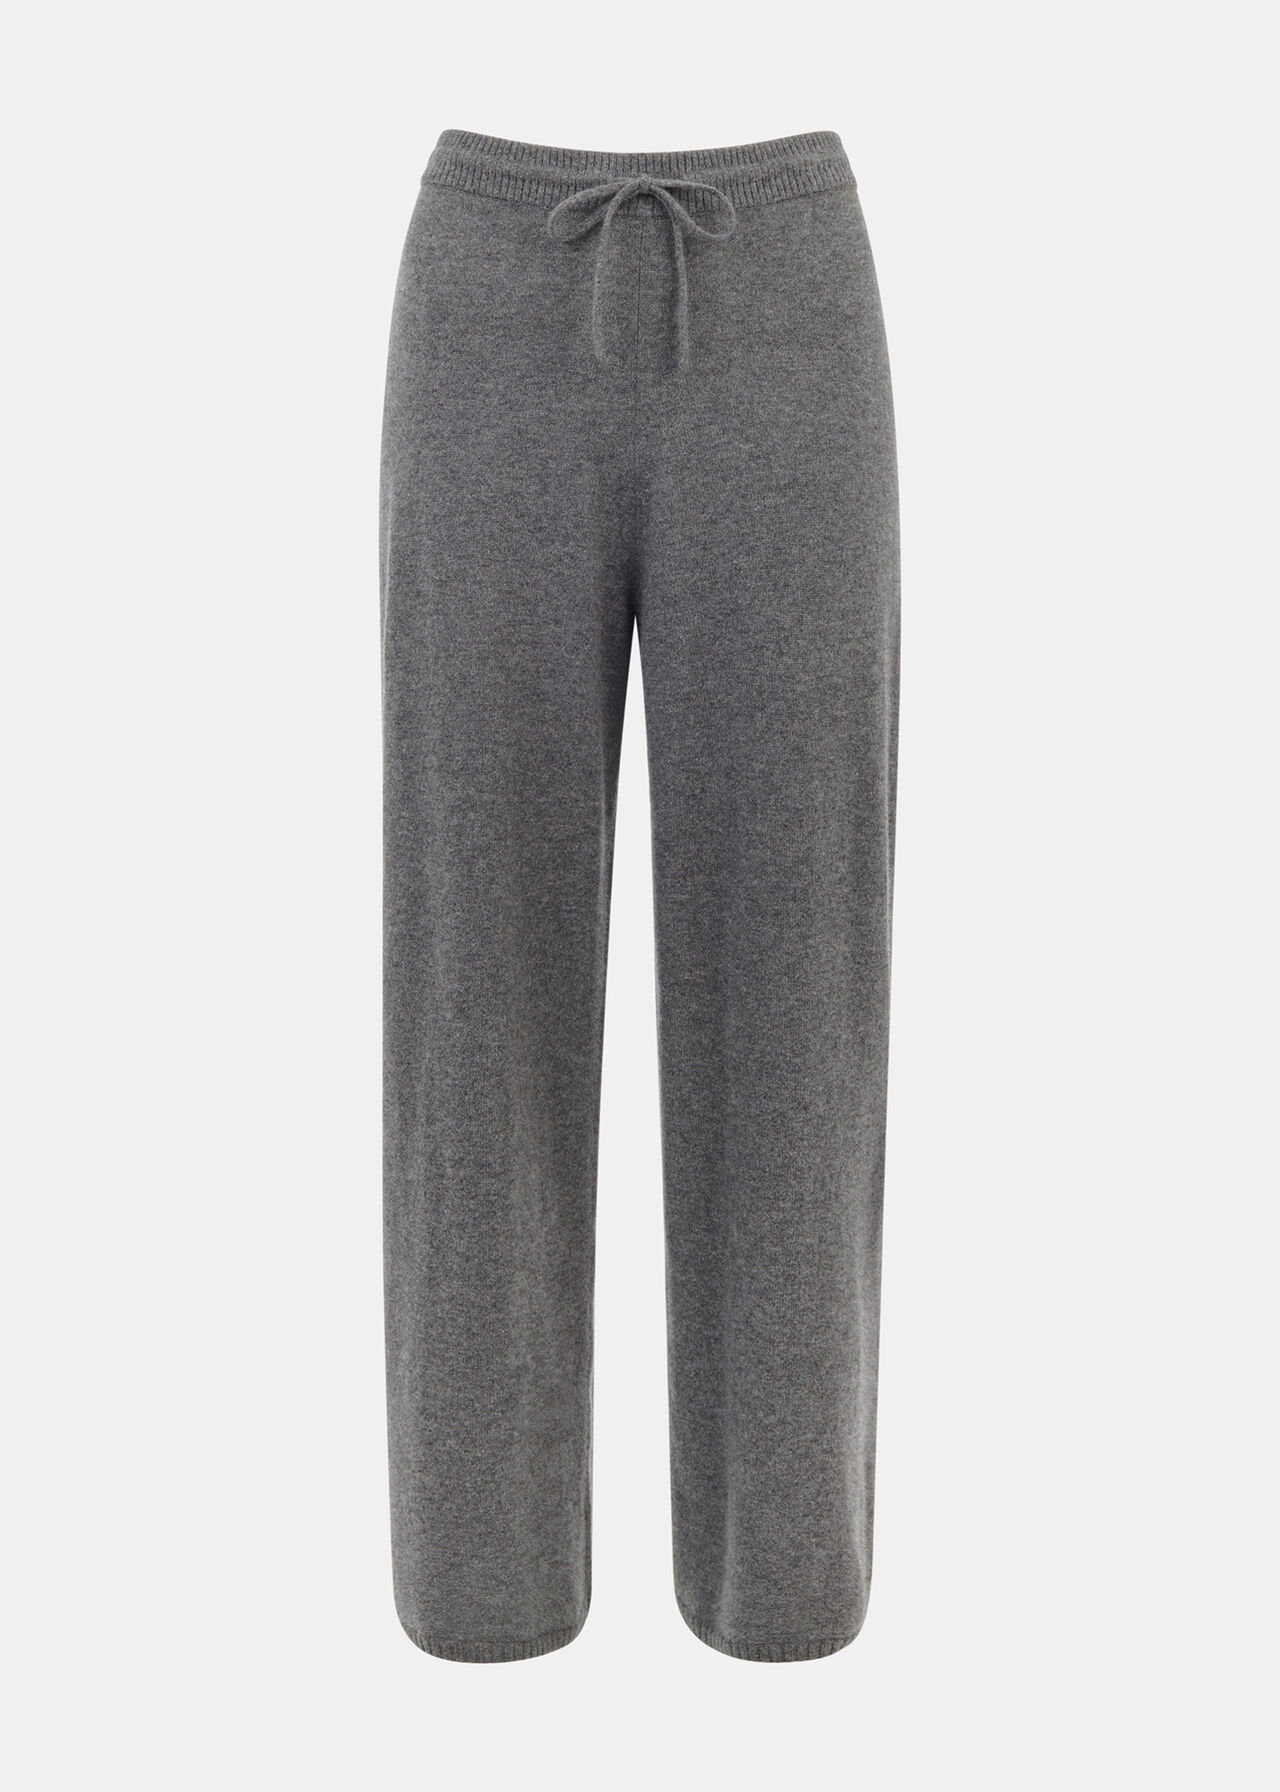 Grey Cashmere Jogger, WHISTLES